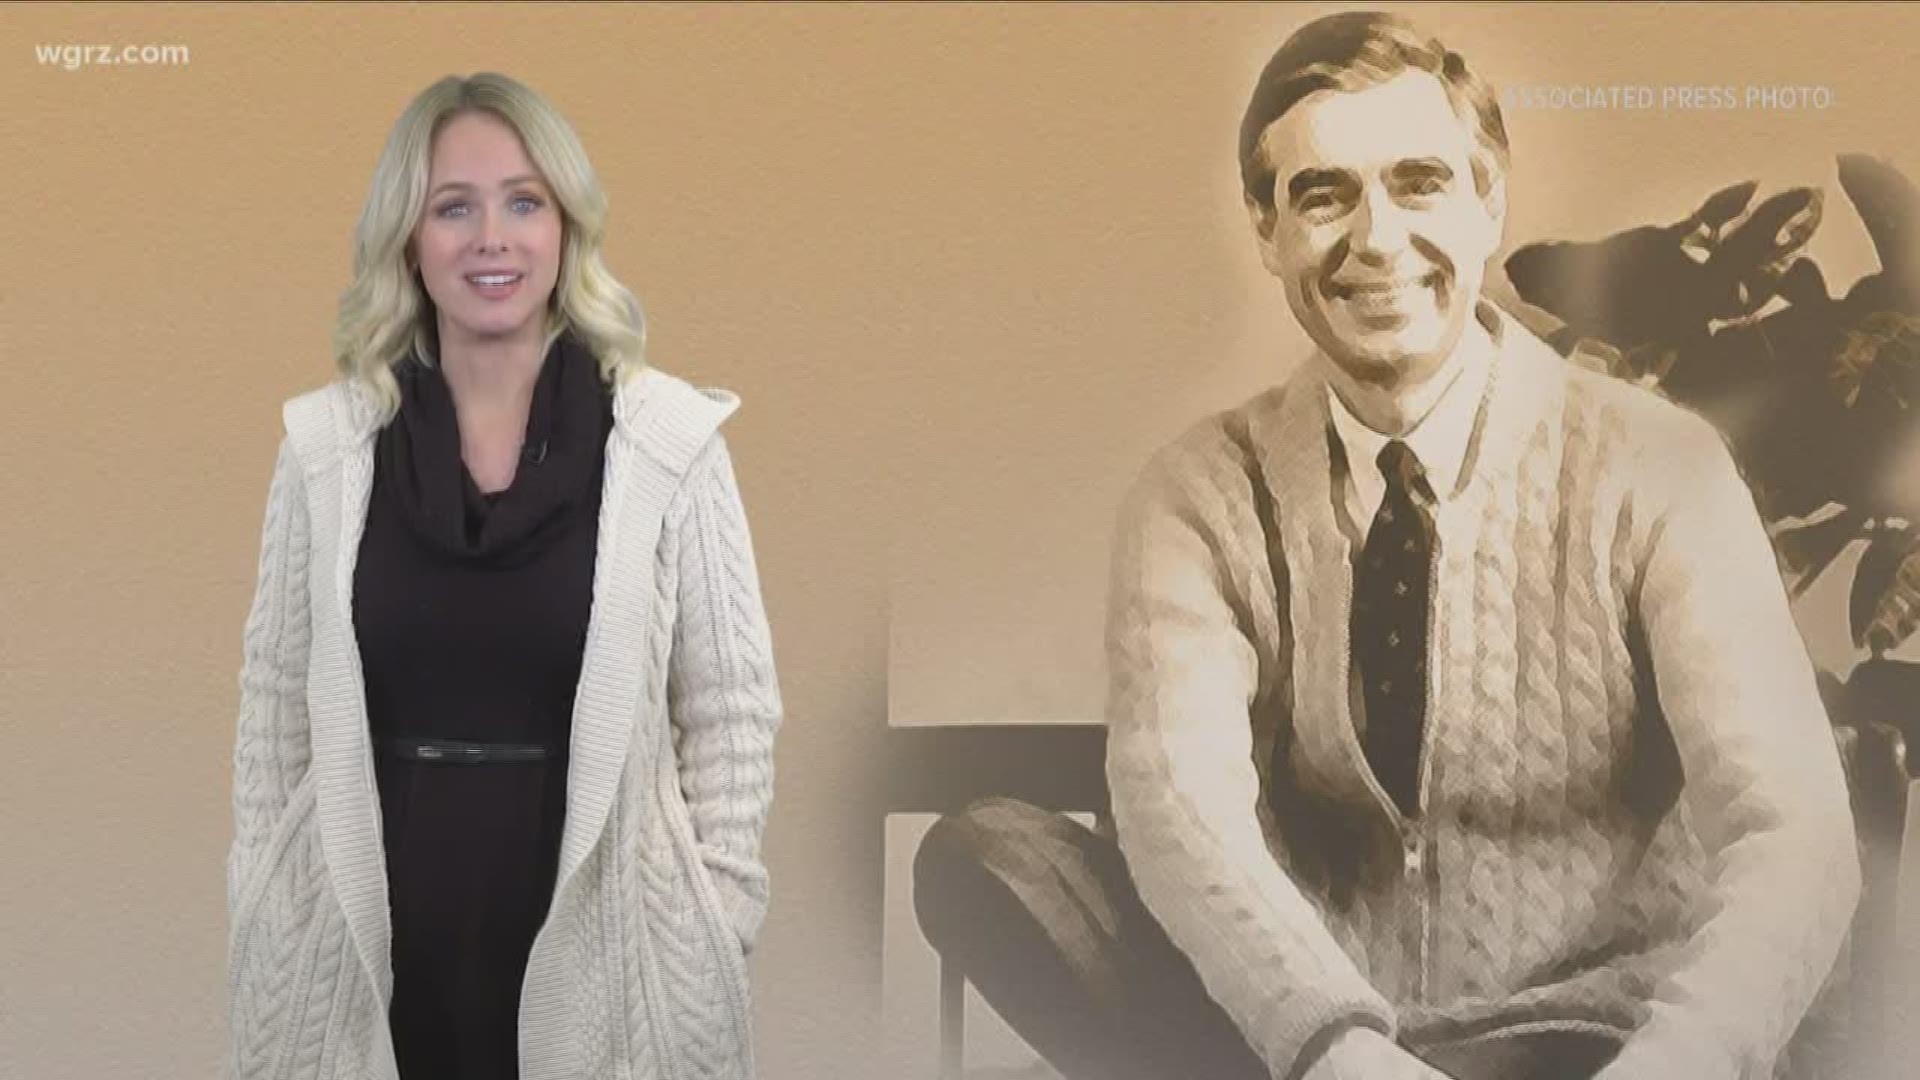 Most Buffalo stories of the day: Mr. Rogers & kindness